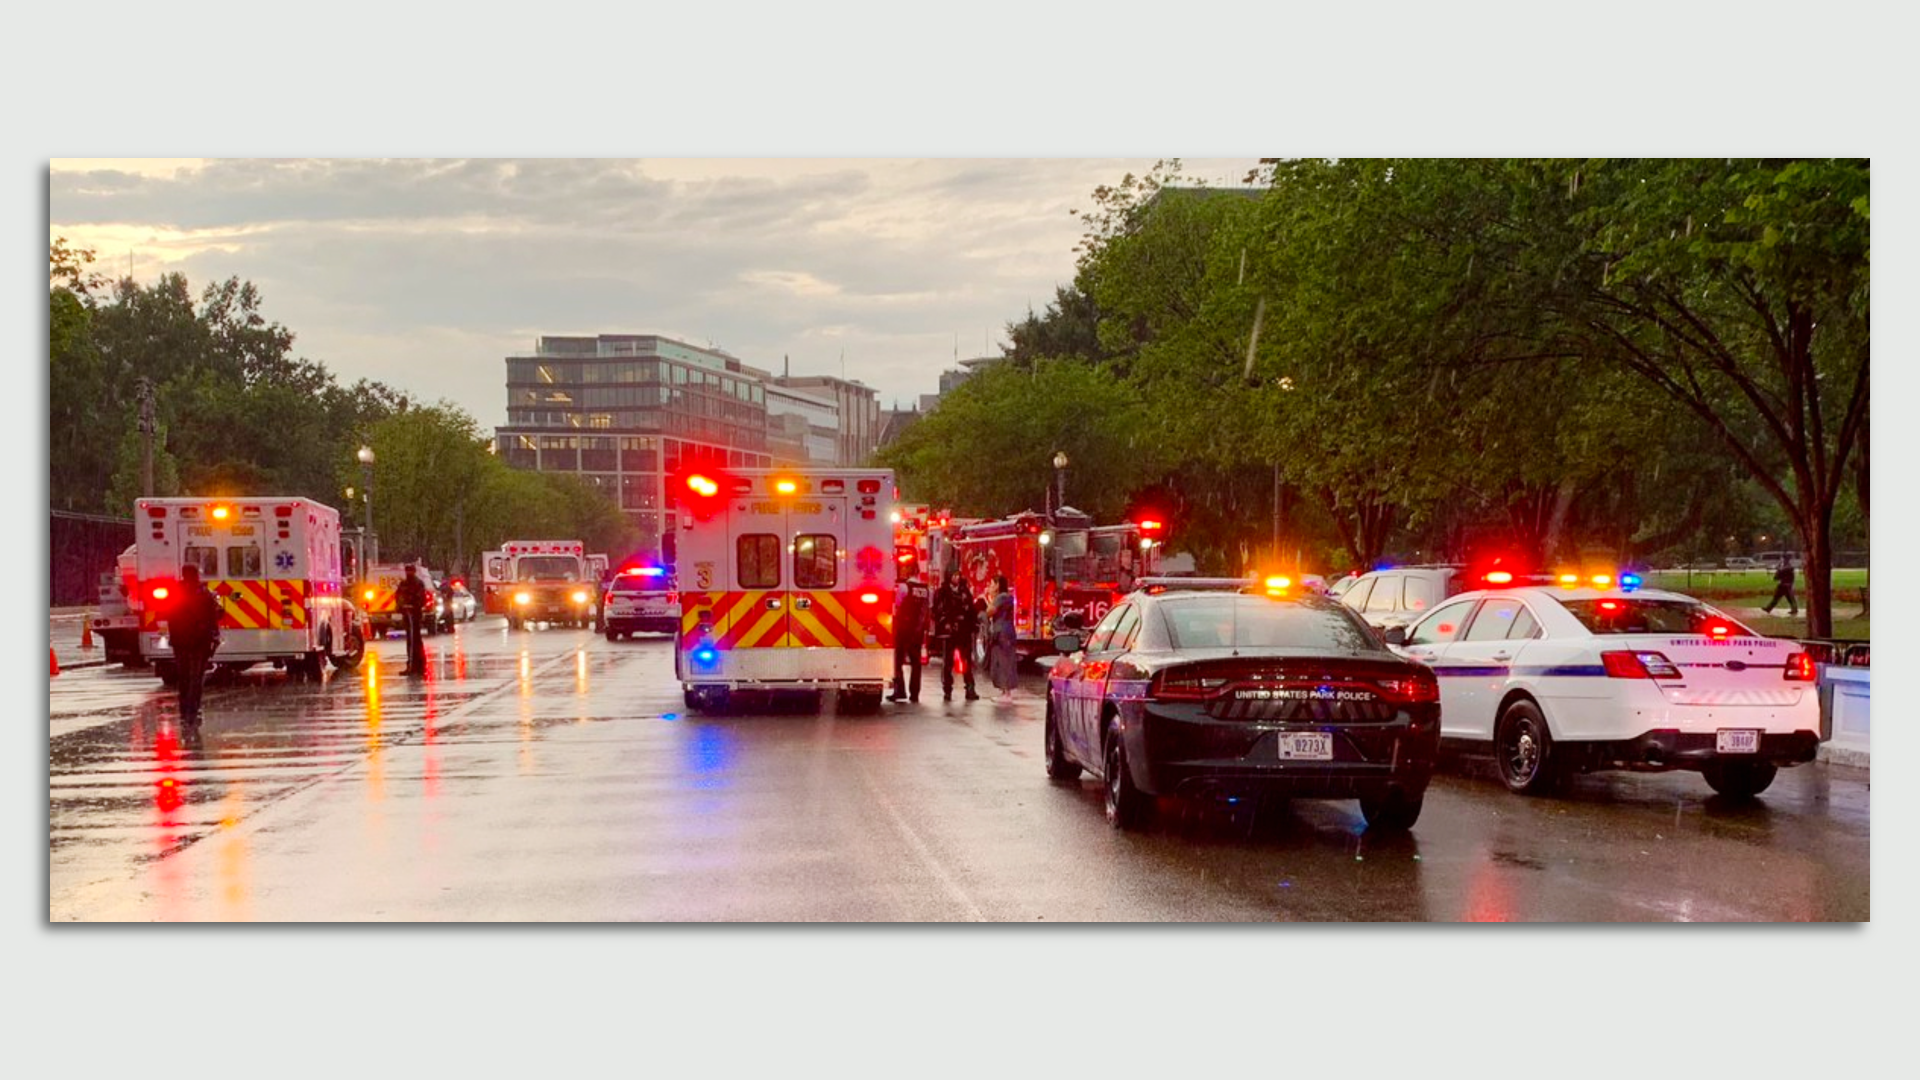 An image of the emergency scene near Lafeyette Park in D.C. after the lightning strike.